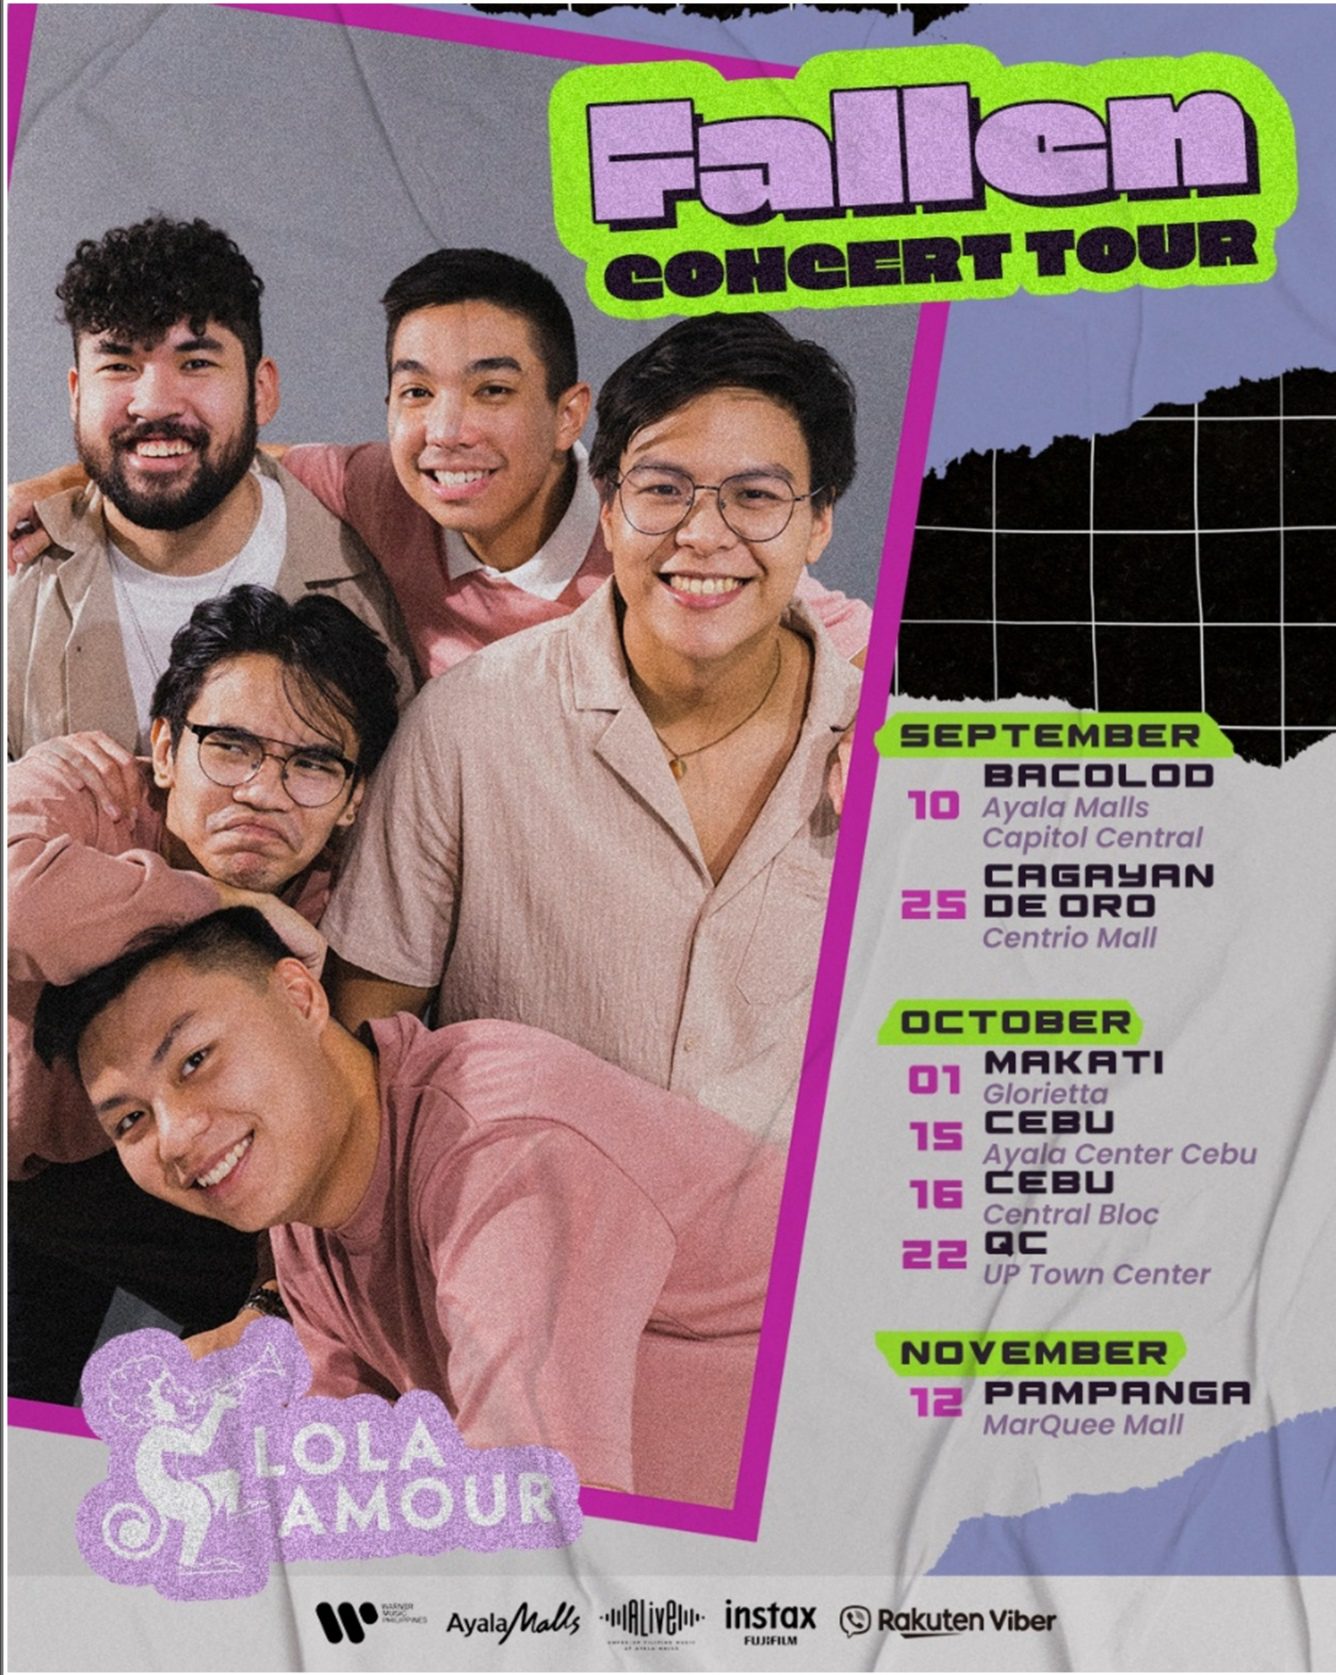 Lola Amour releases new dates for Fallen Concert tour Philippine Concerts